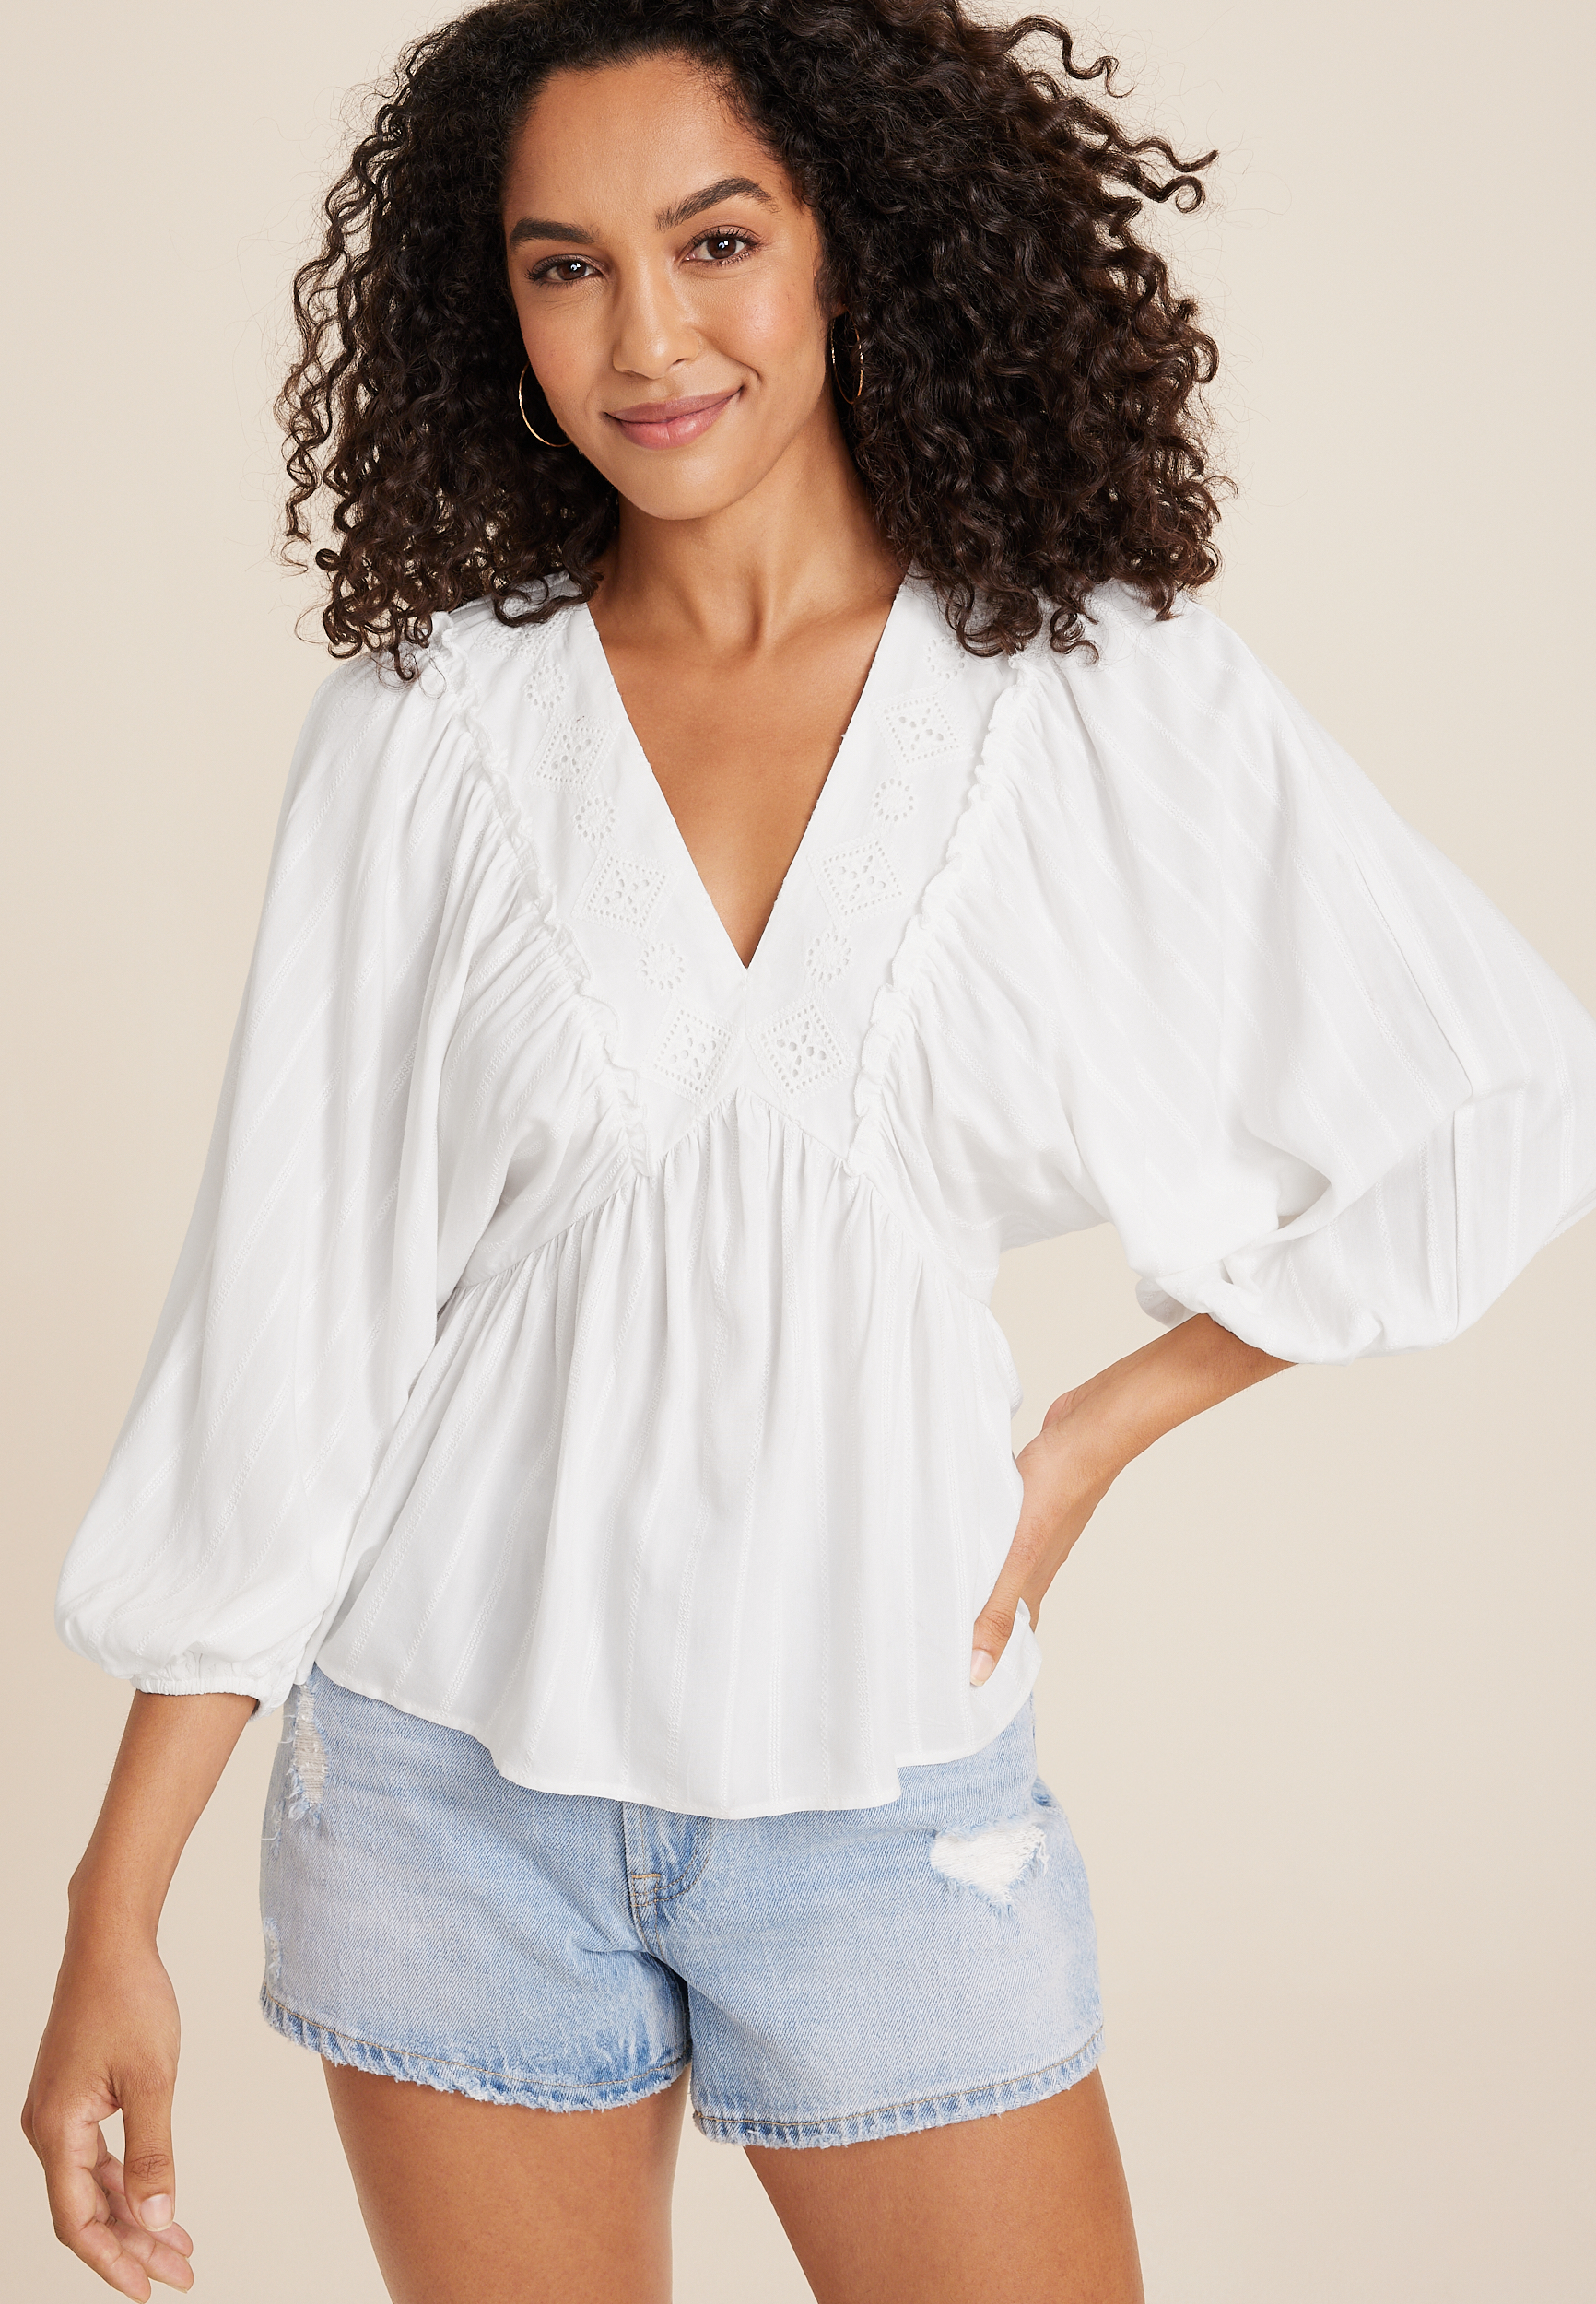 Women's Shirts & Blouses: Flowy, Floral, Peasant & More | maurices